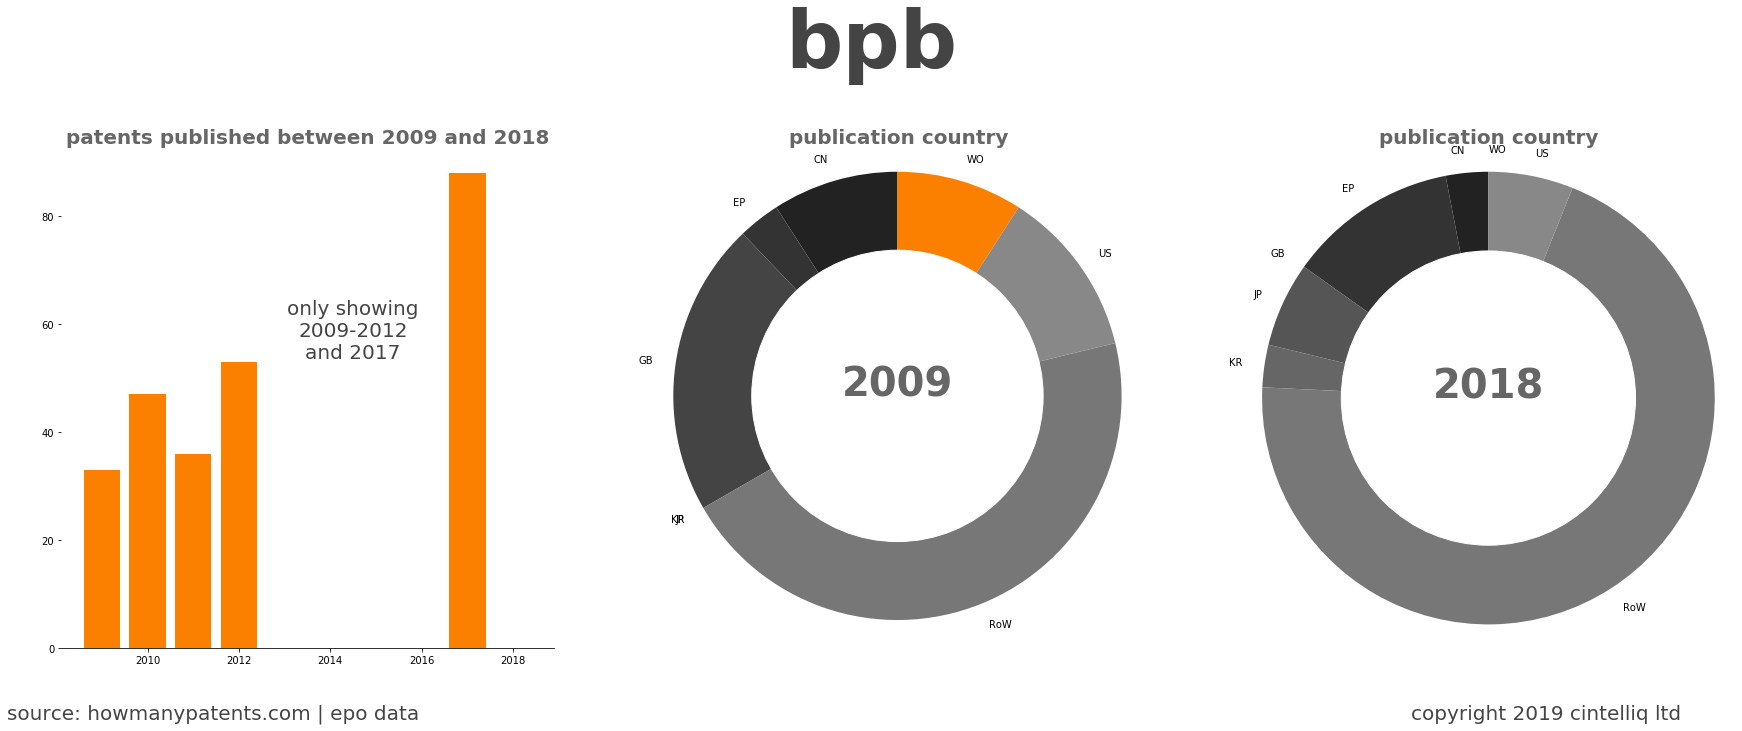 summary of patents for Bpb